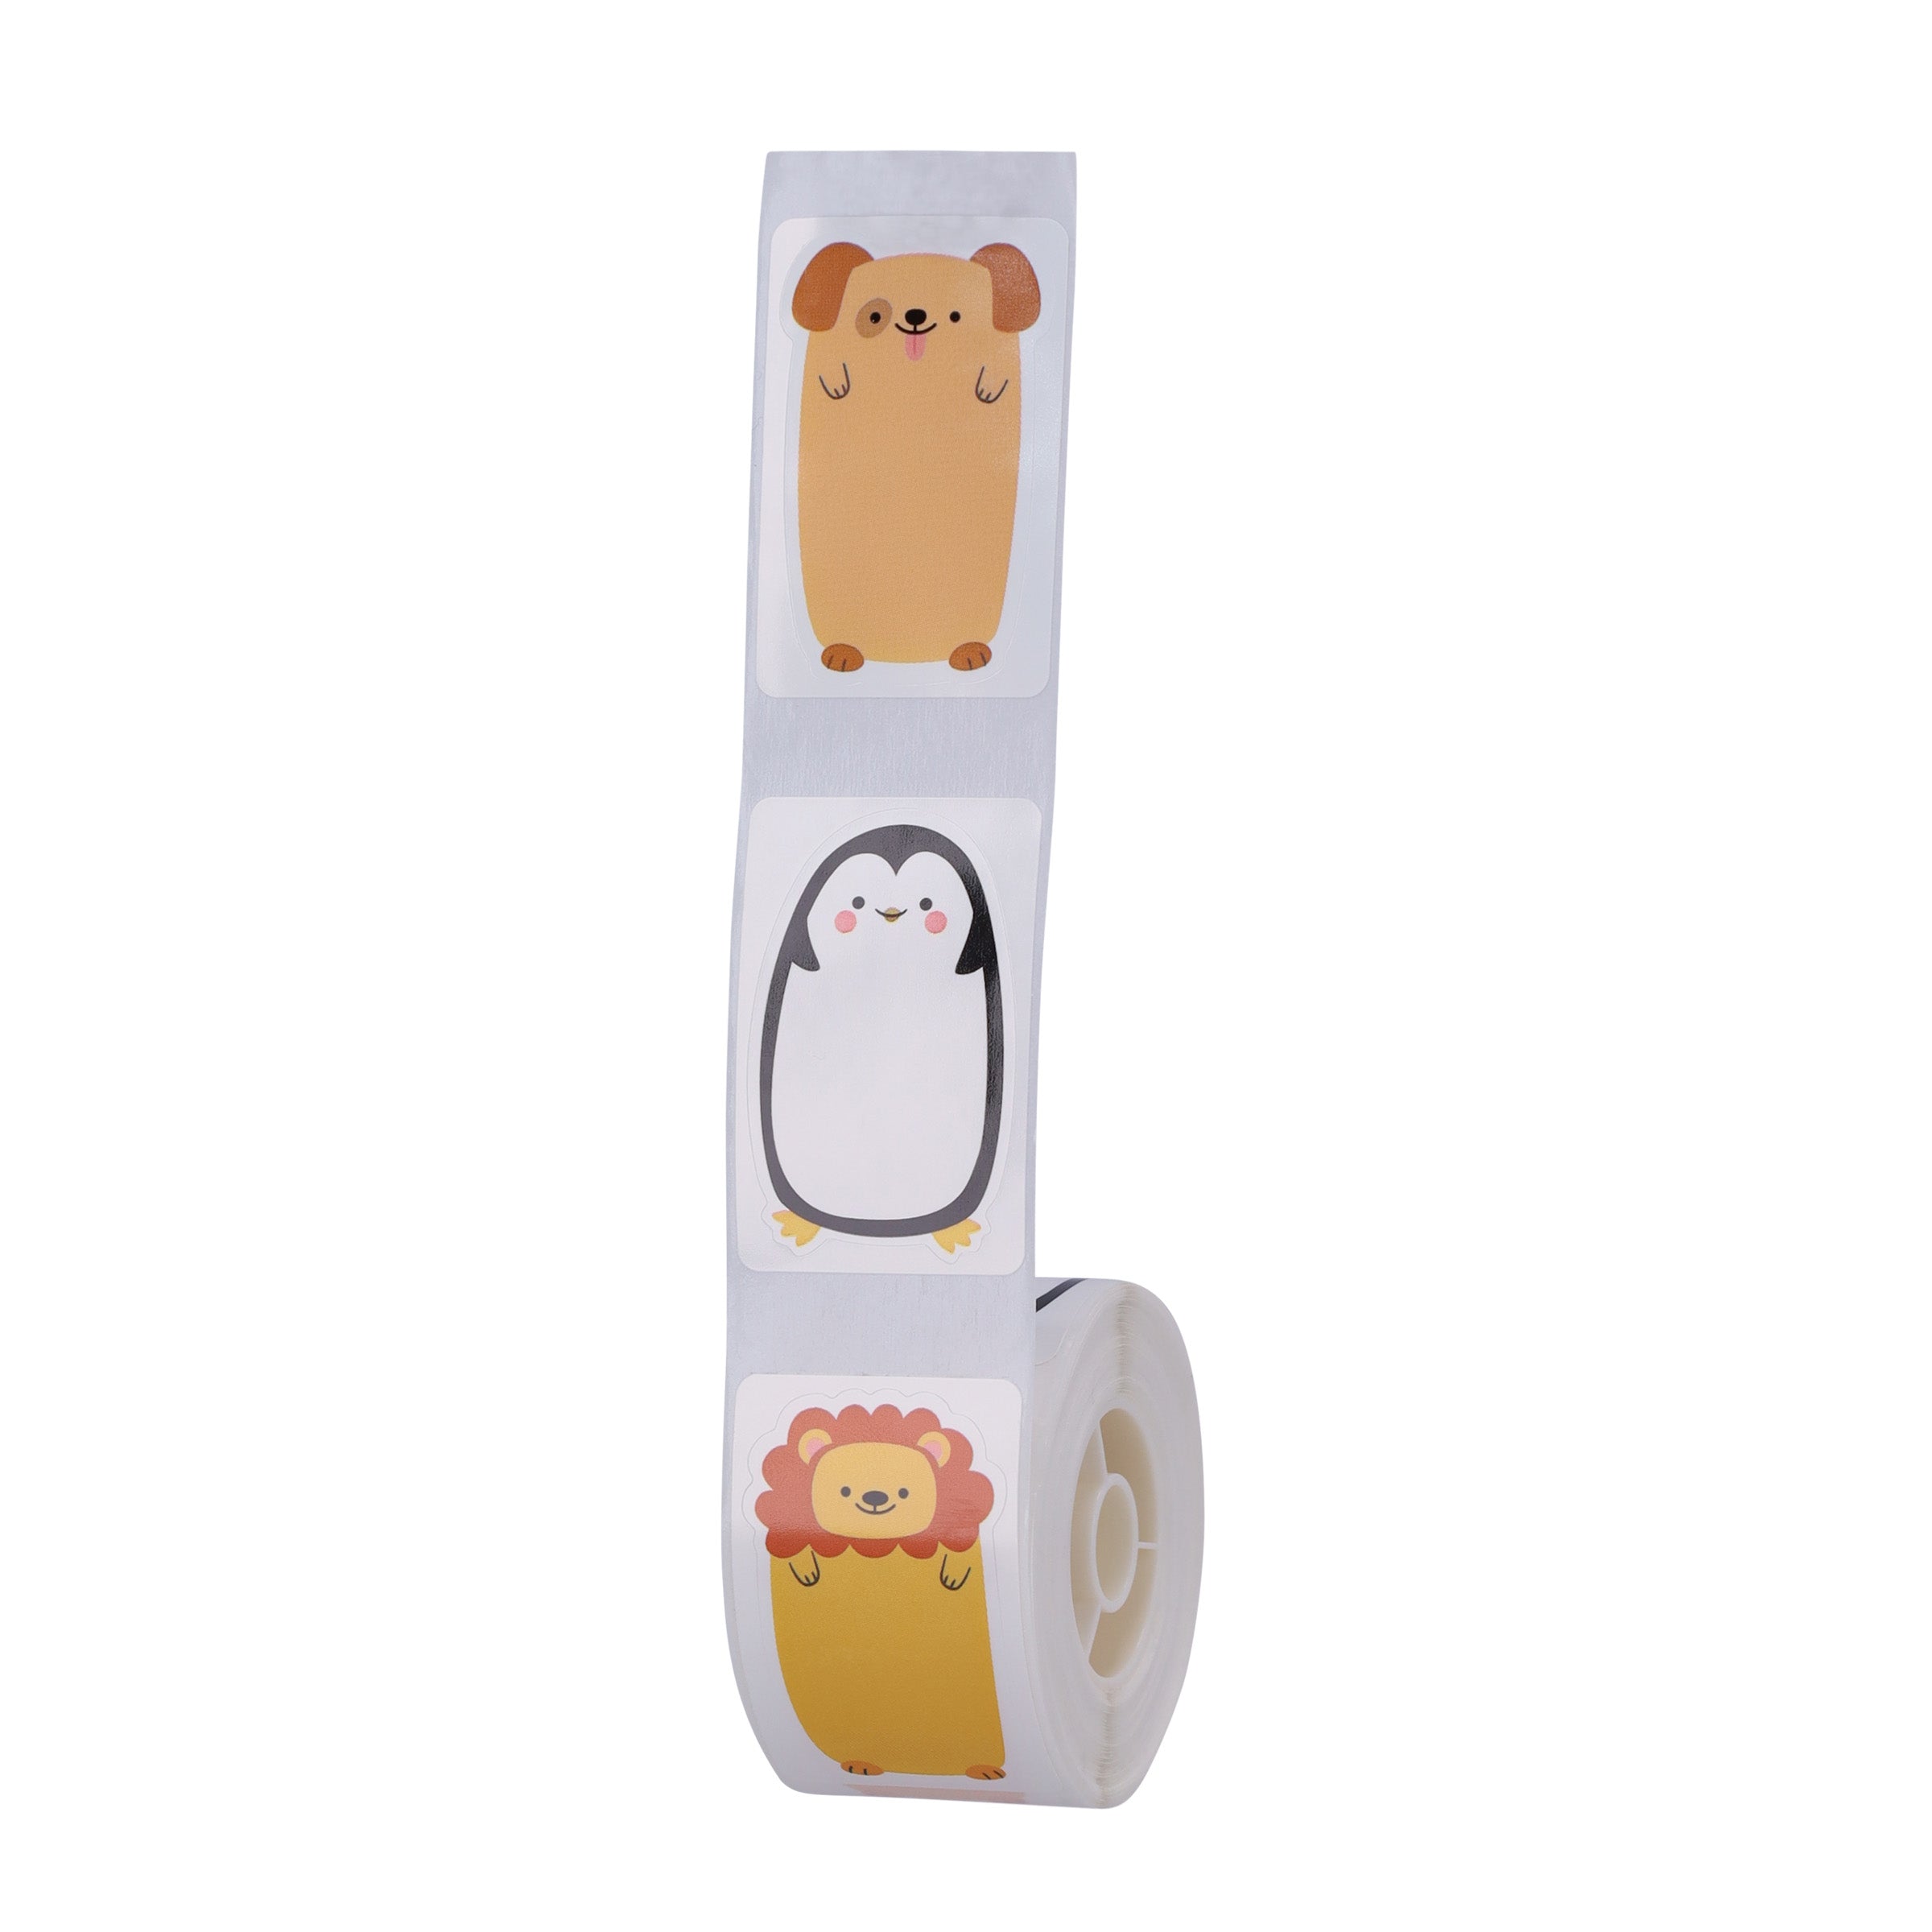 NB353 - NIIMBOT - D101 ONLY - R25*39 - 160 LABELS PER ROLL - ANIMALS DESIGN